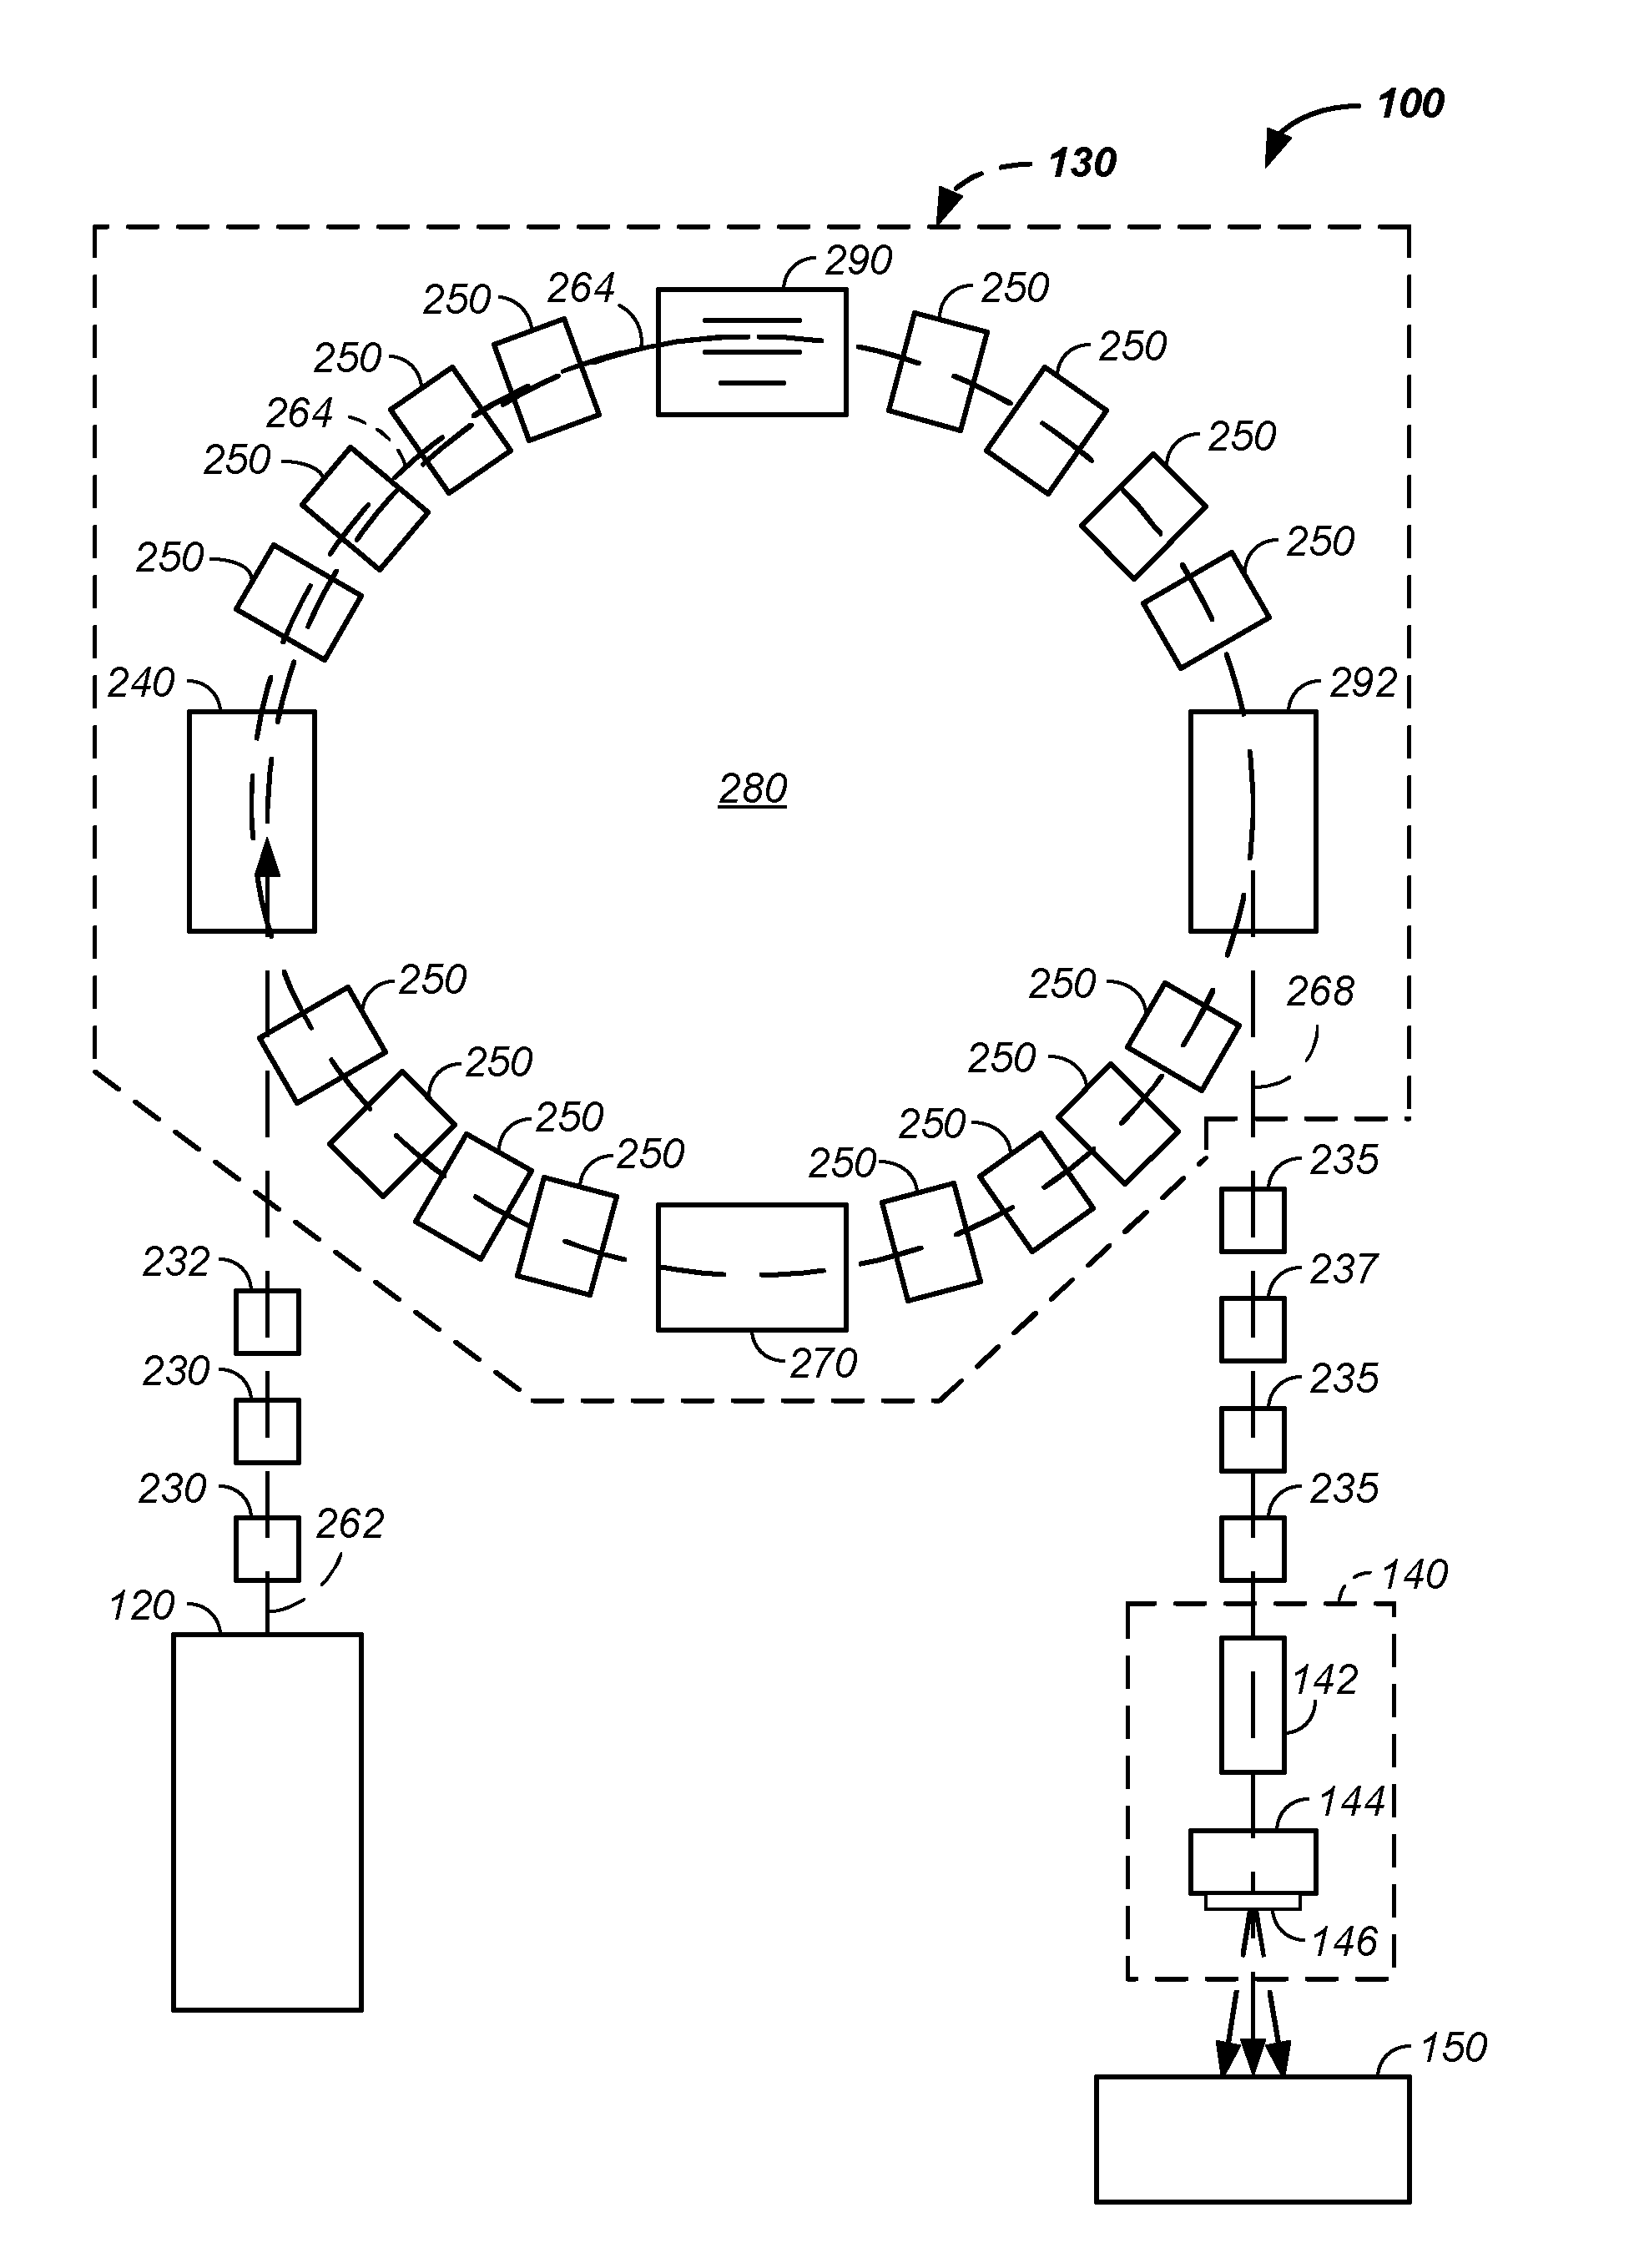 Integrated tomography - cancer treatment apparatus and method of use thereof